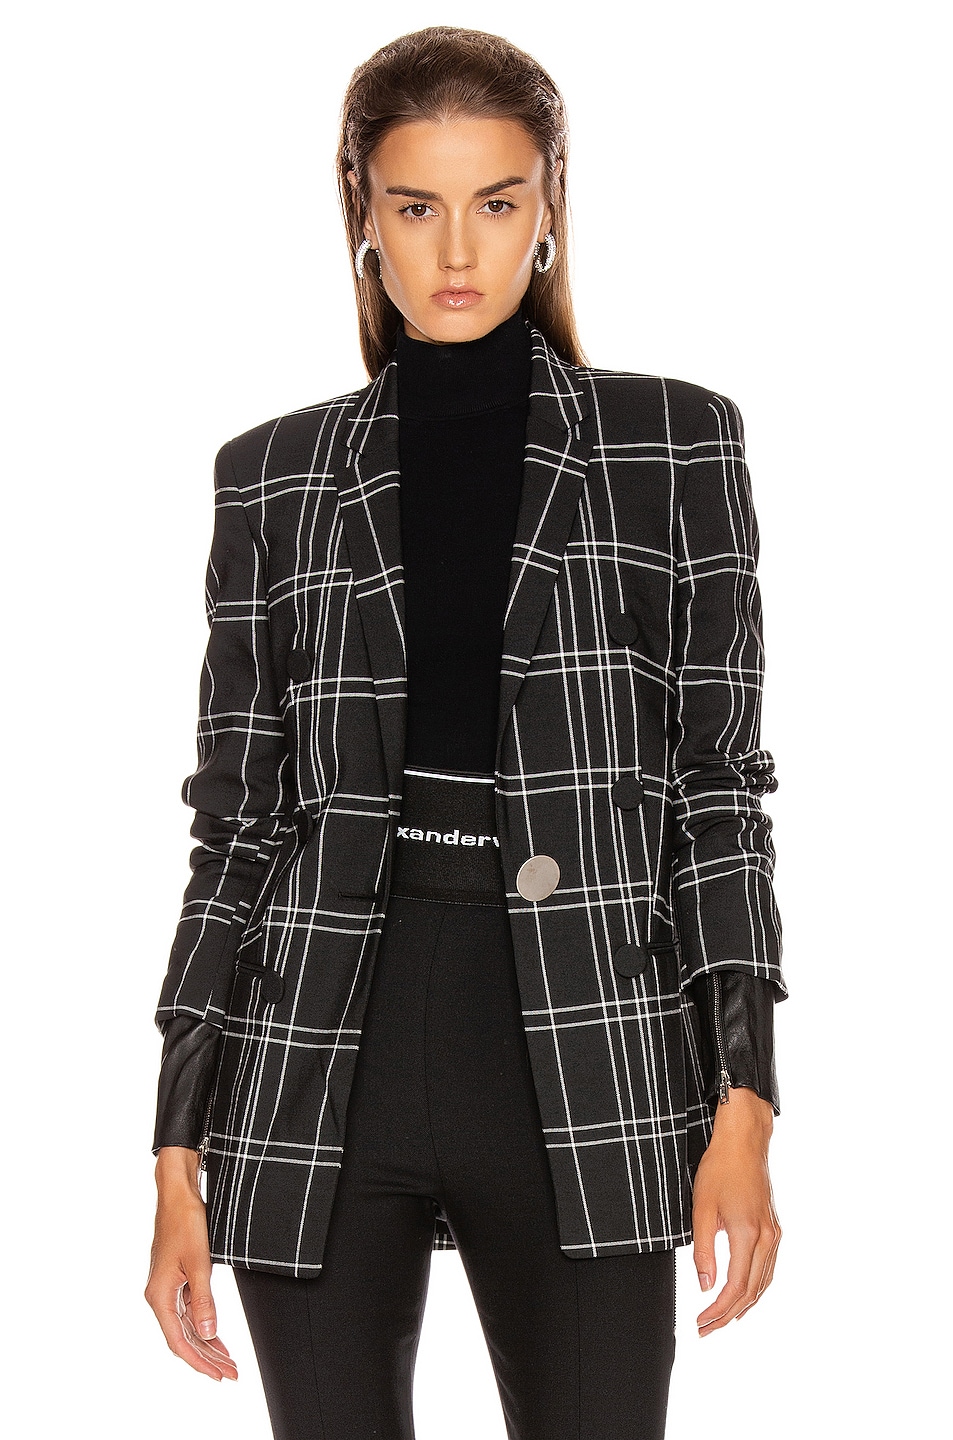 Image 1 of Alexander Wang Peaked Lapel Blazer with Leather Sleeves in Black & White Windowpane